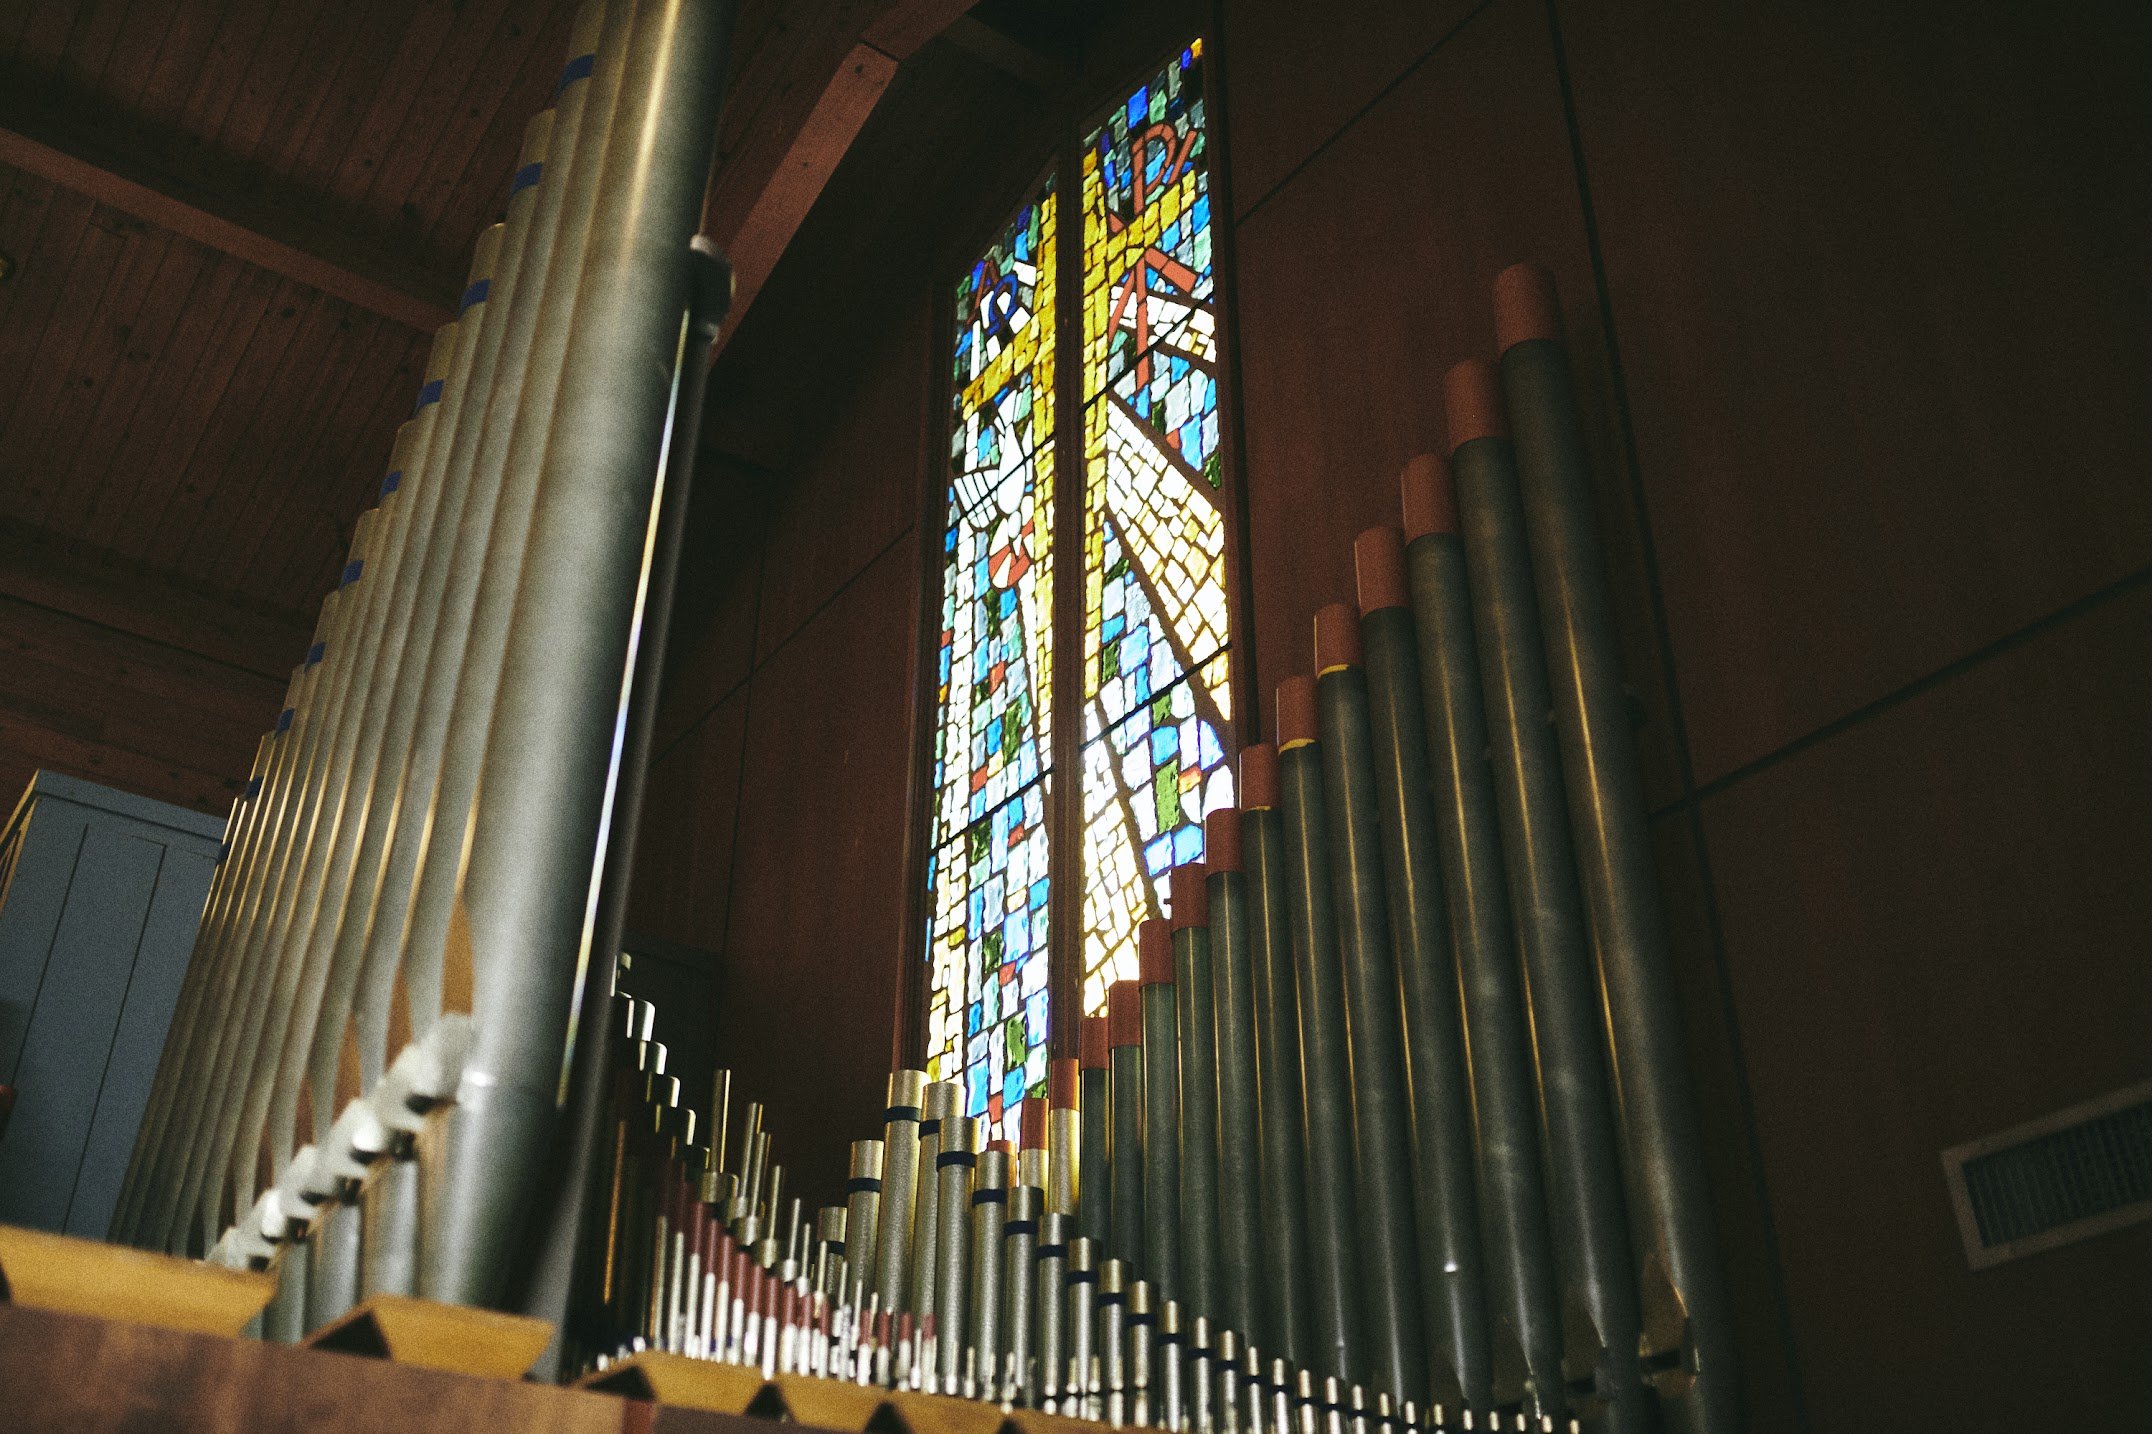 Organ pipes stained glass.jpeg